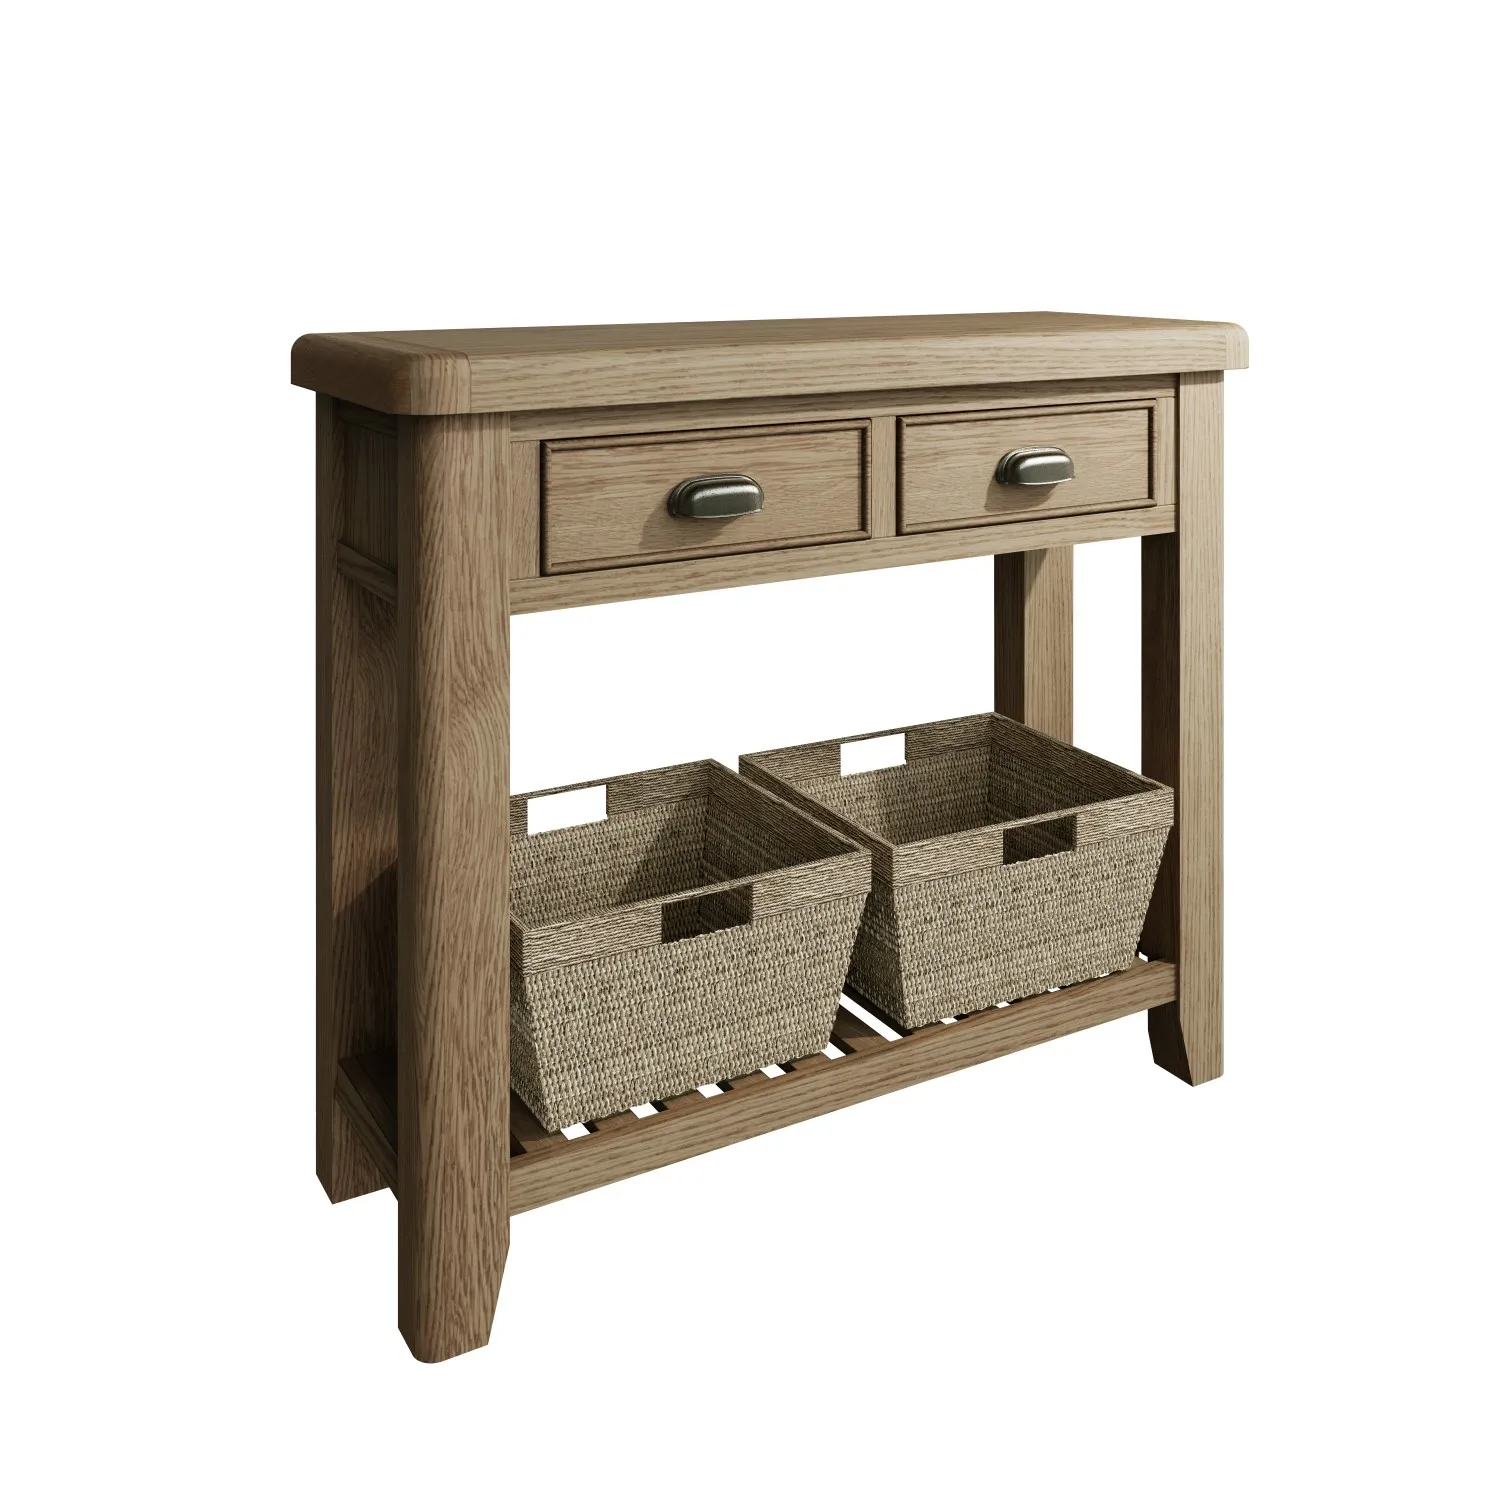 Oak Wood 2 Drawer Console Table with Shelf